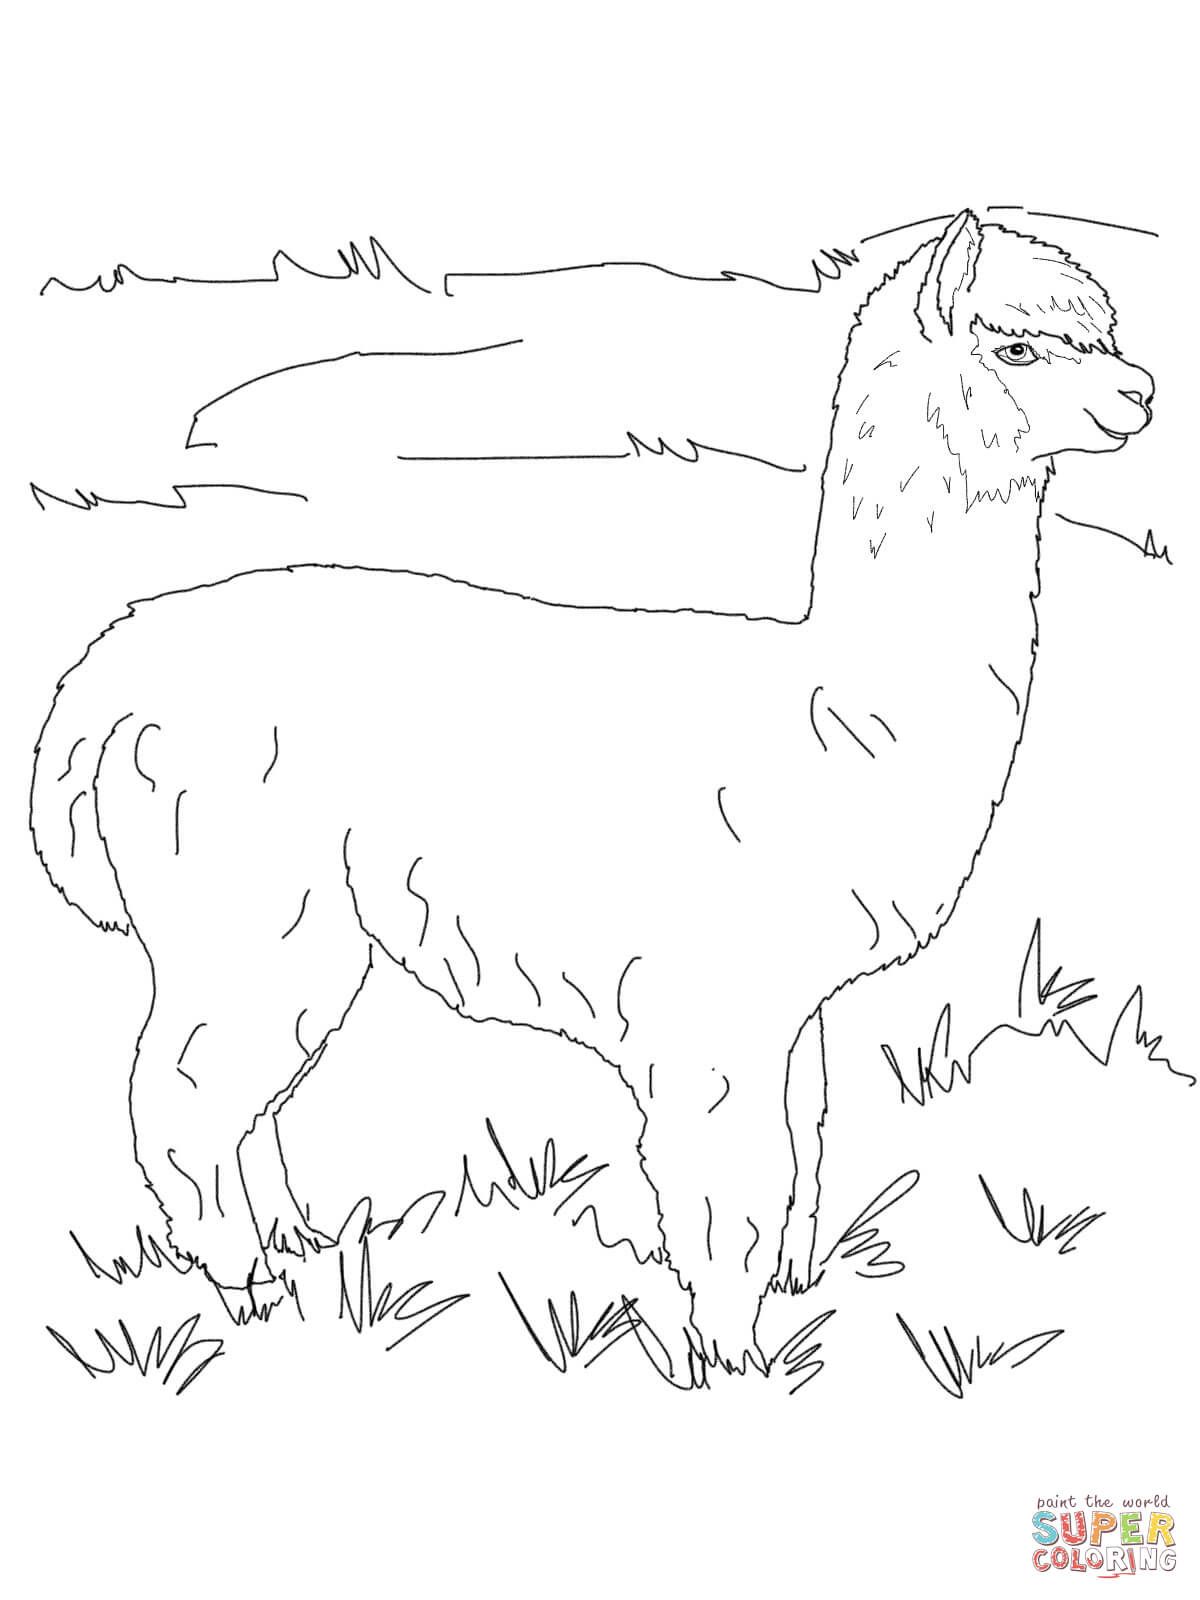 Alpaca clipart coloring page. Pages free misc ideas